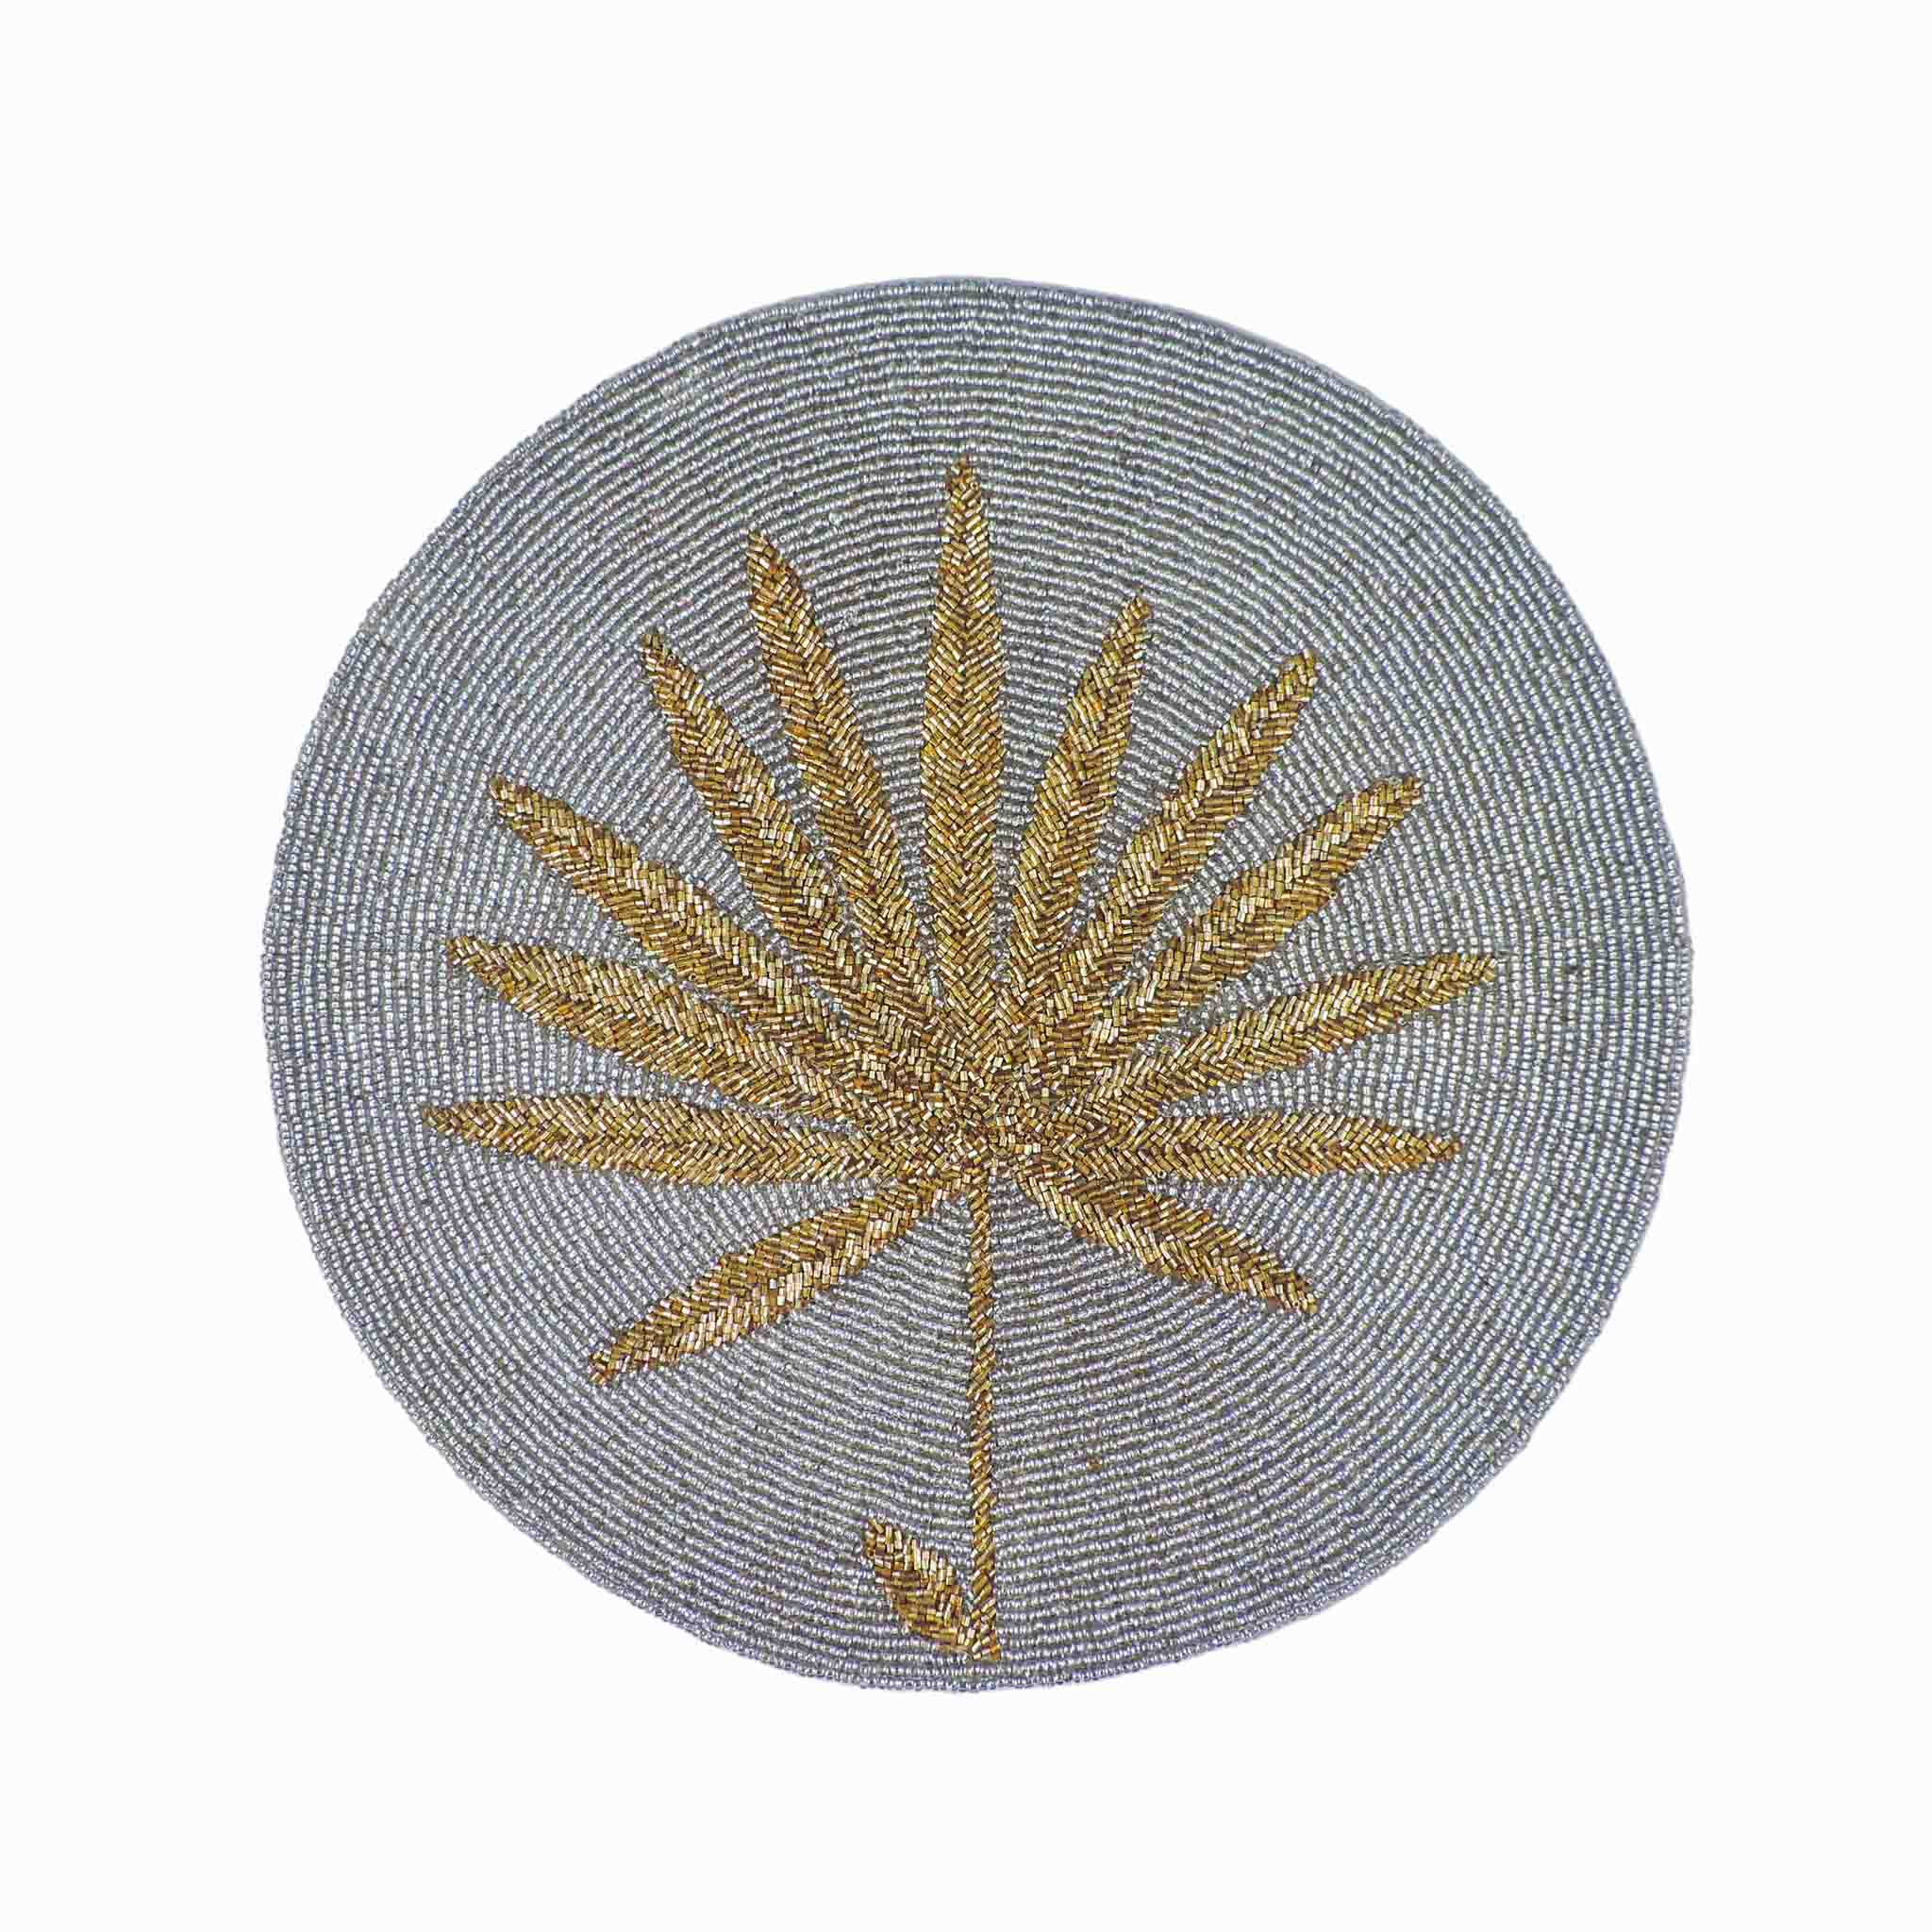 I Be-Leaf Bead Embroidered Placemat in Grey & Gold, Set of 2/4